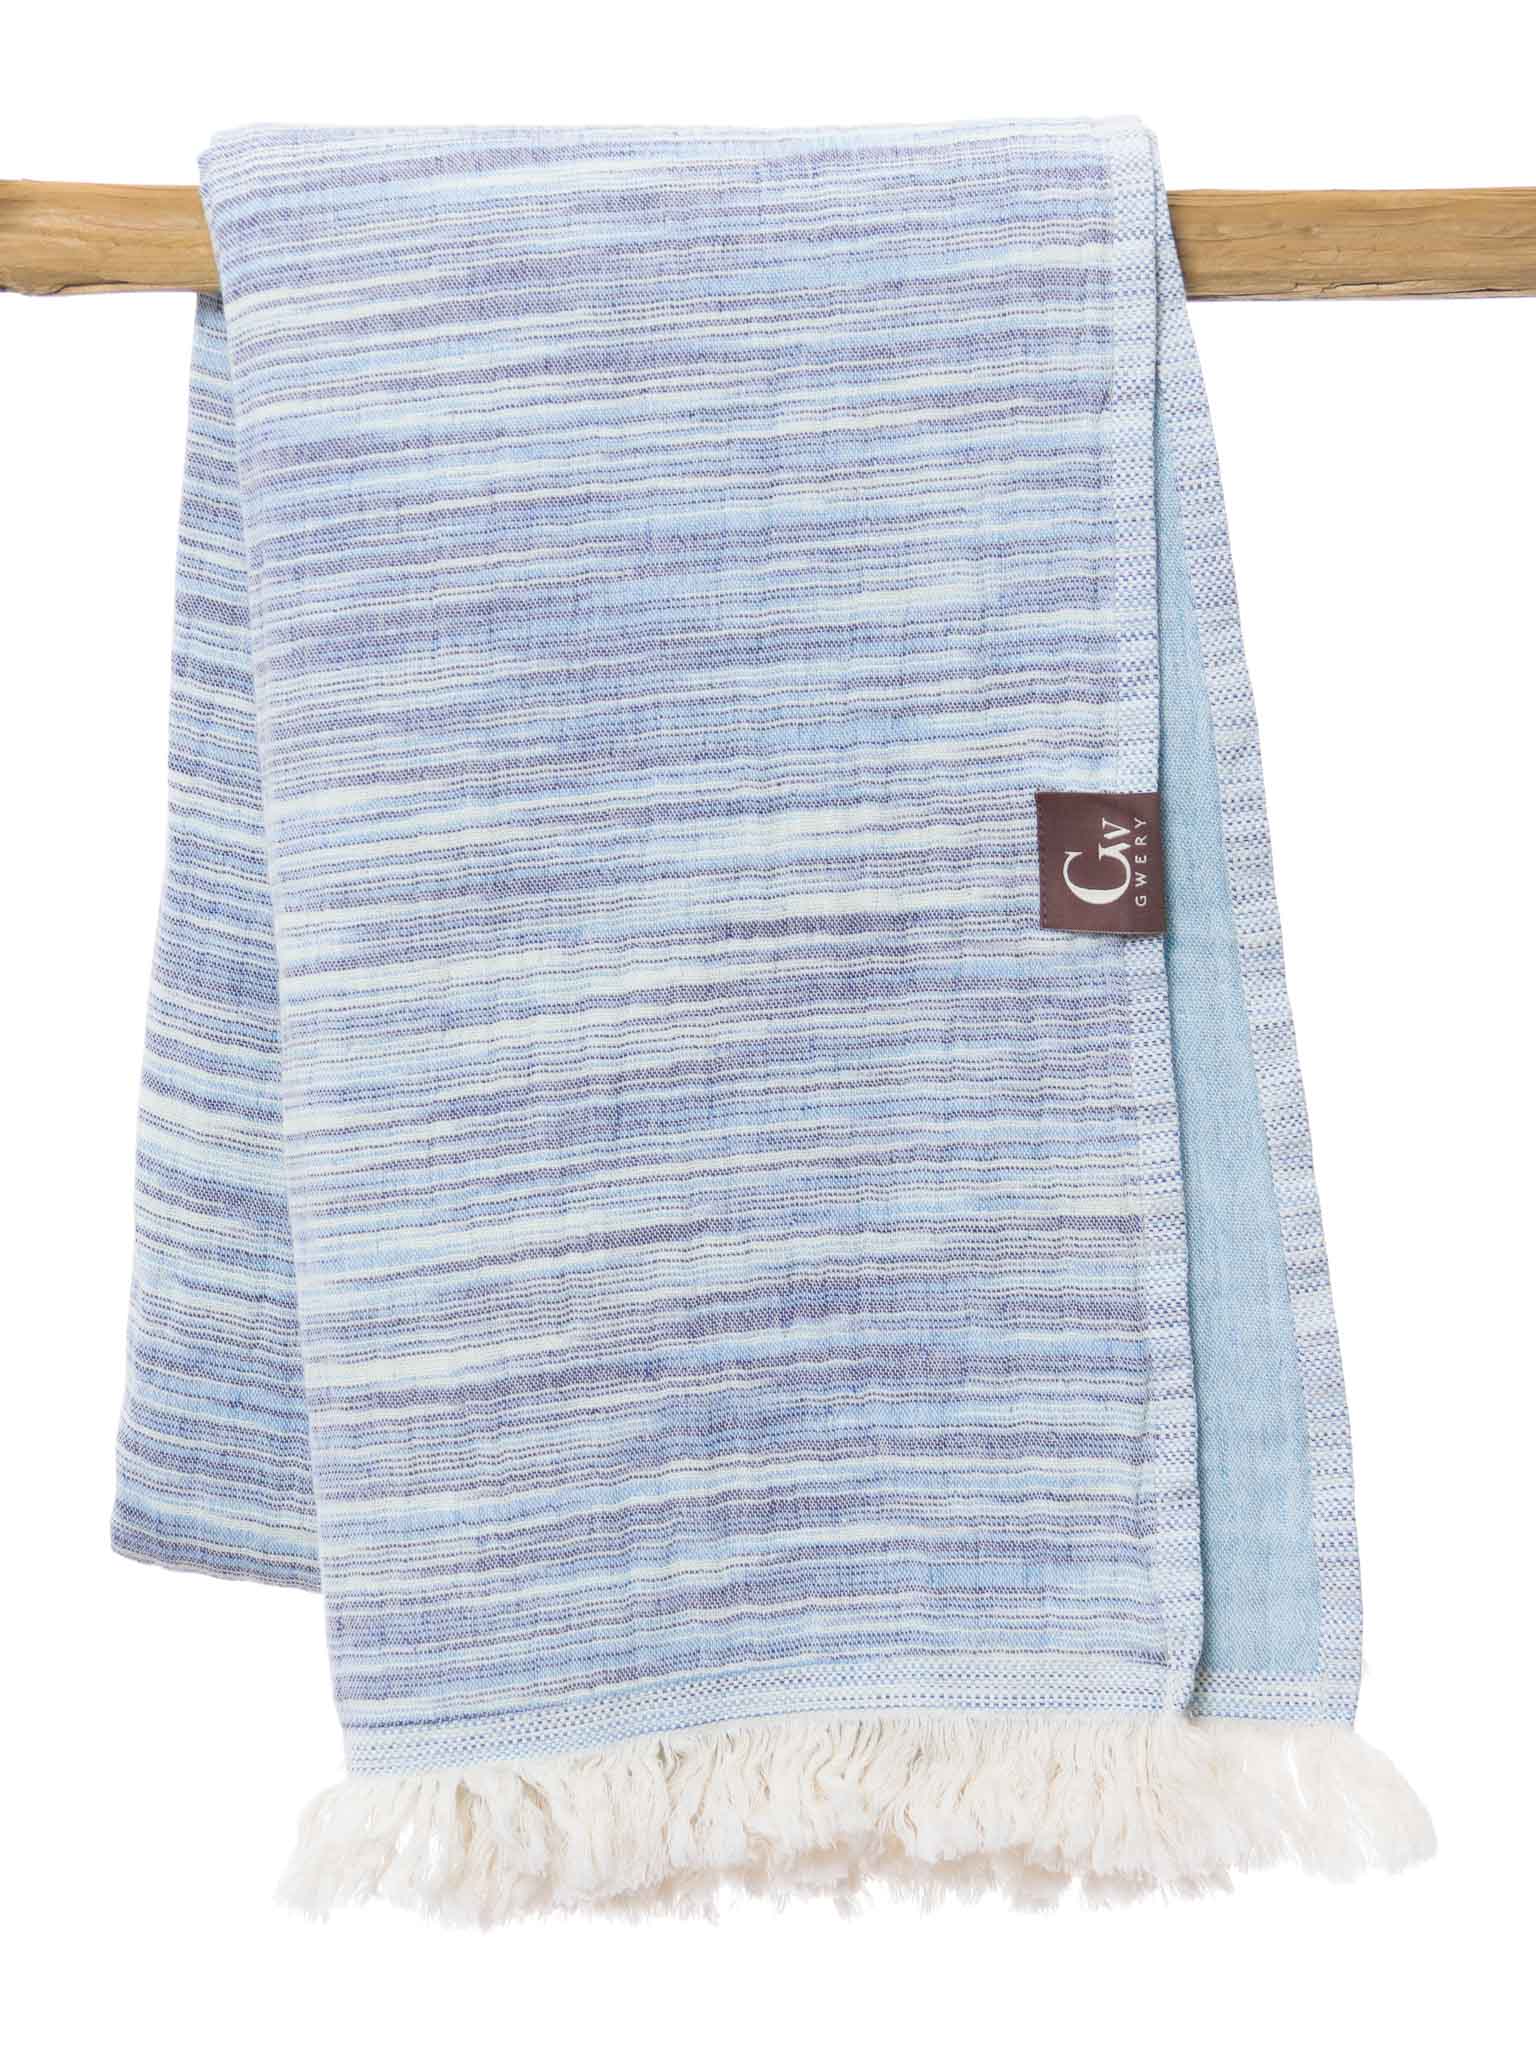 Blue patterned double sided beach towel folded